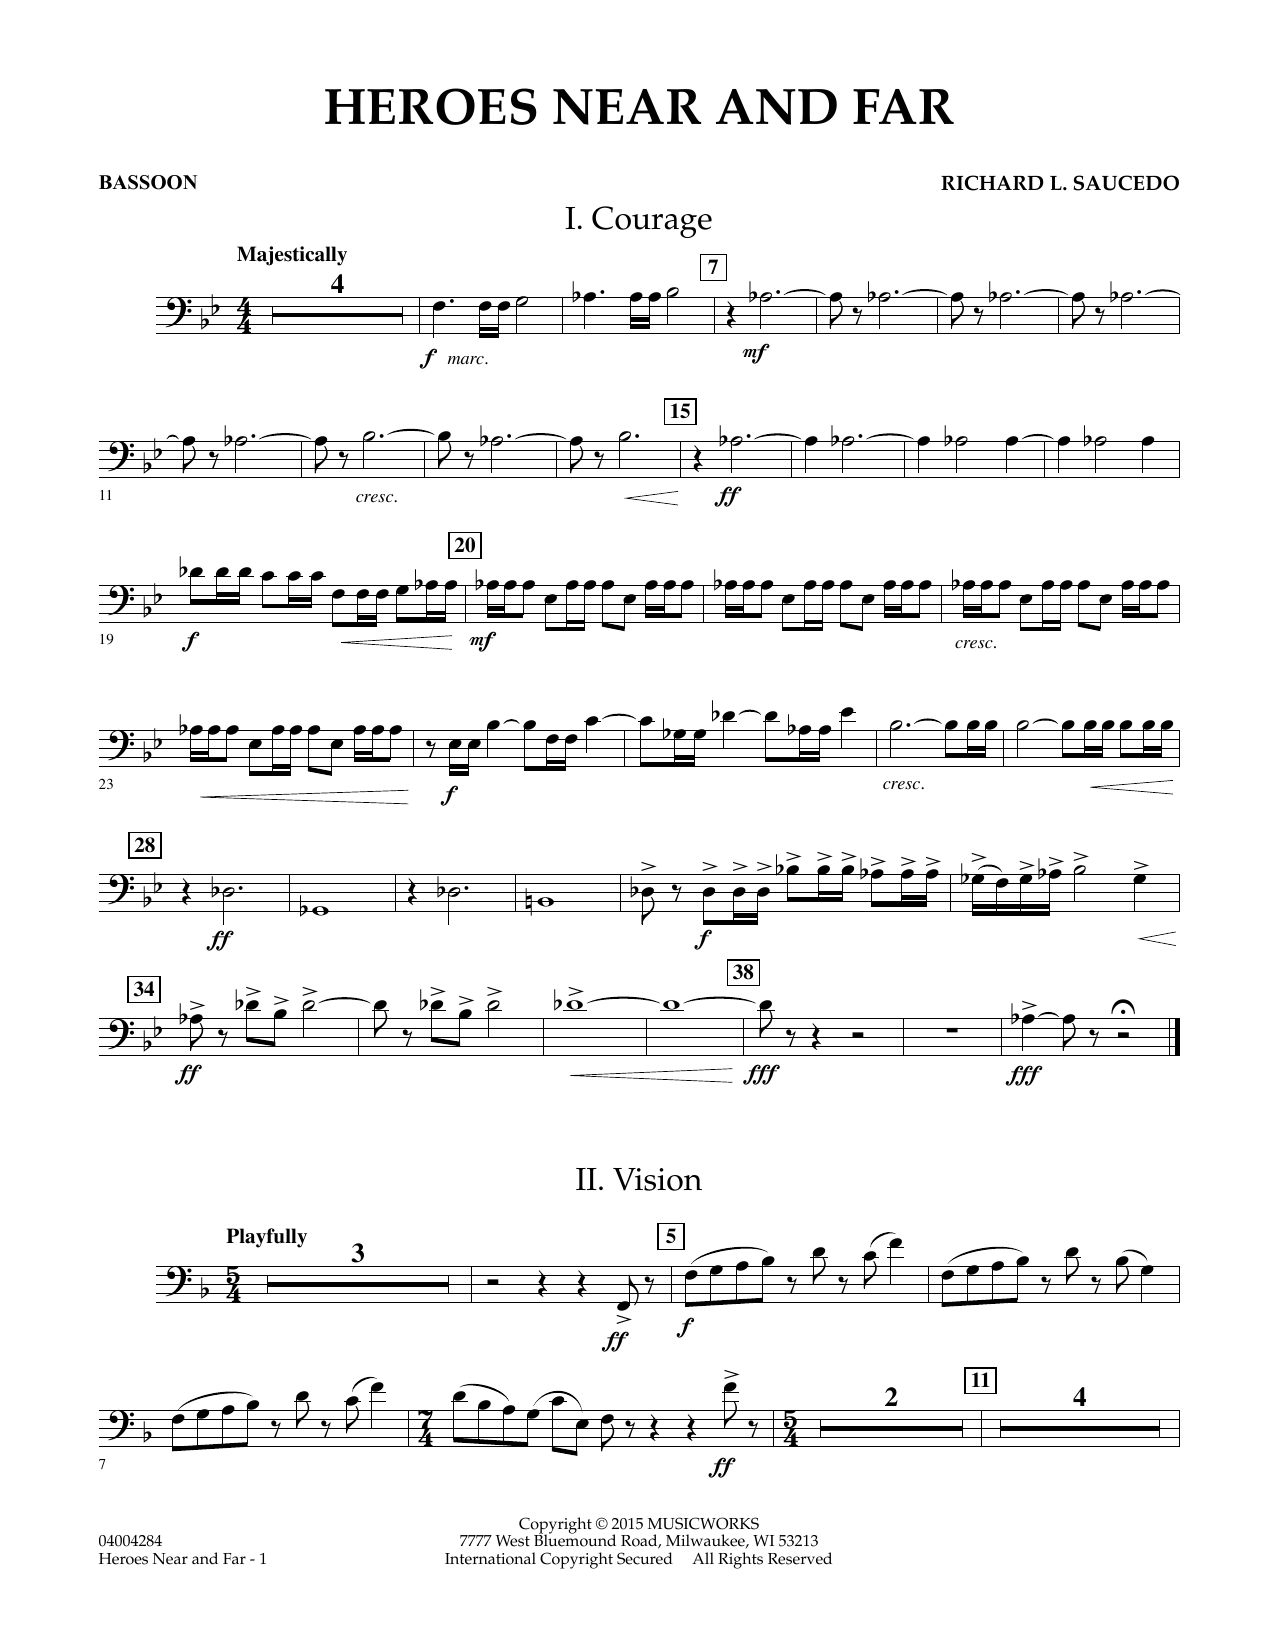 Richard L. Saucedo Heroes Near and Far - Bassoon sheet music notes and chords. Download Printable PDF.